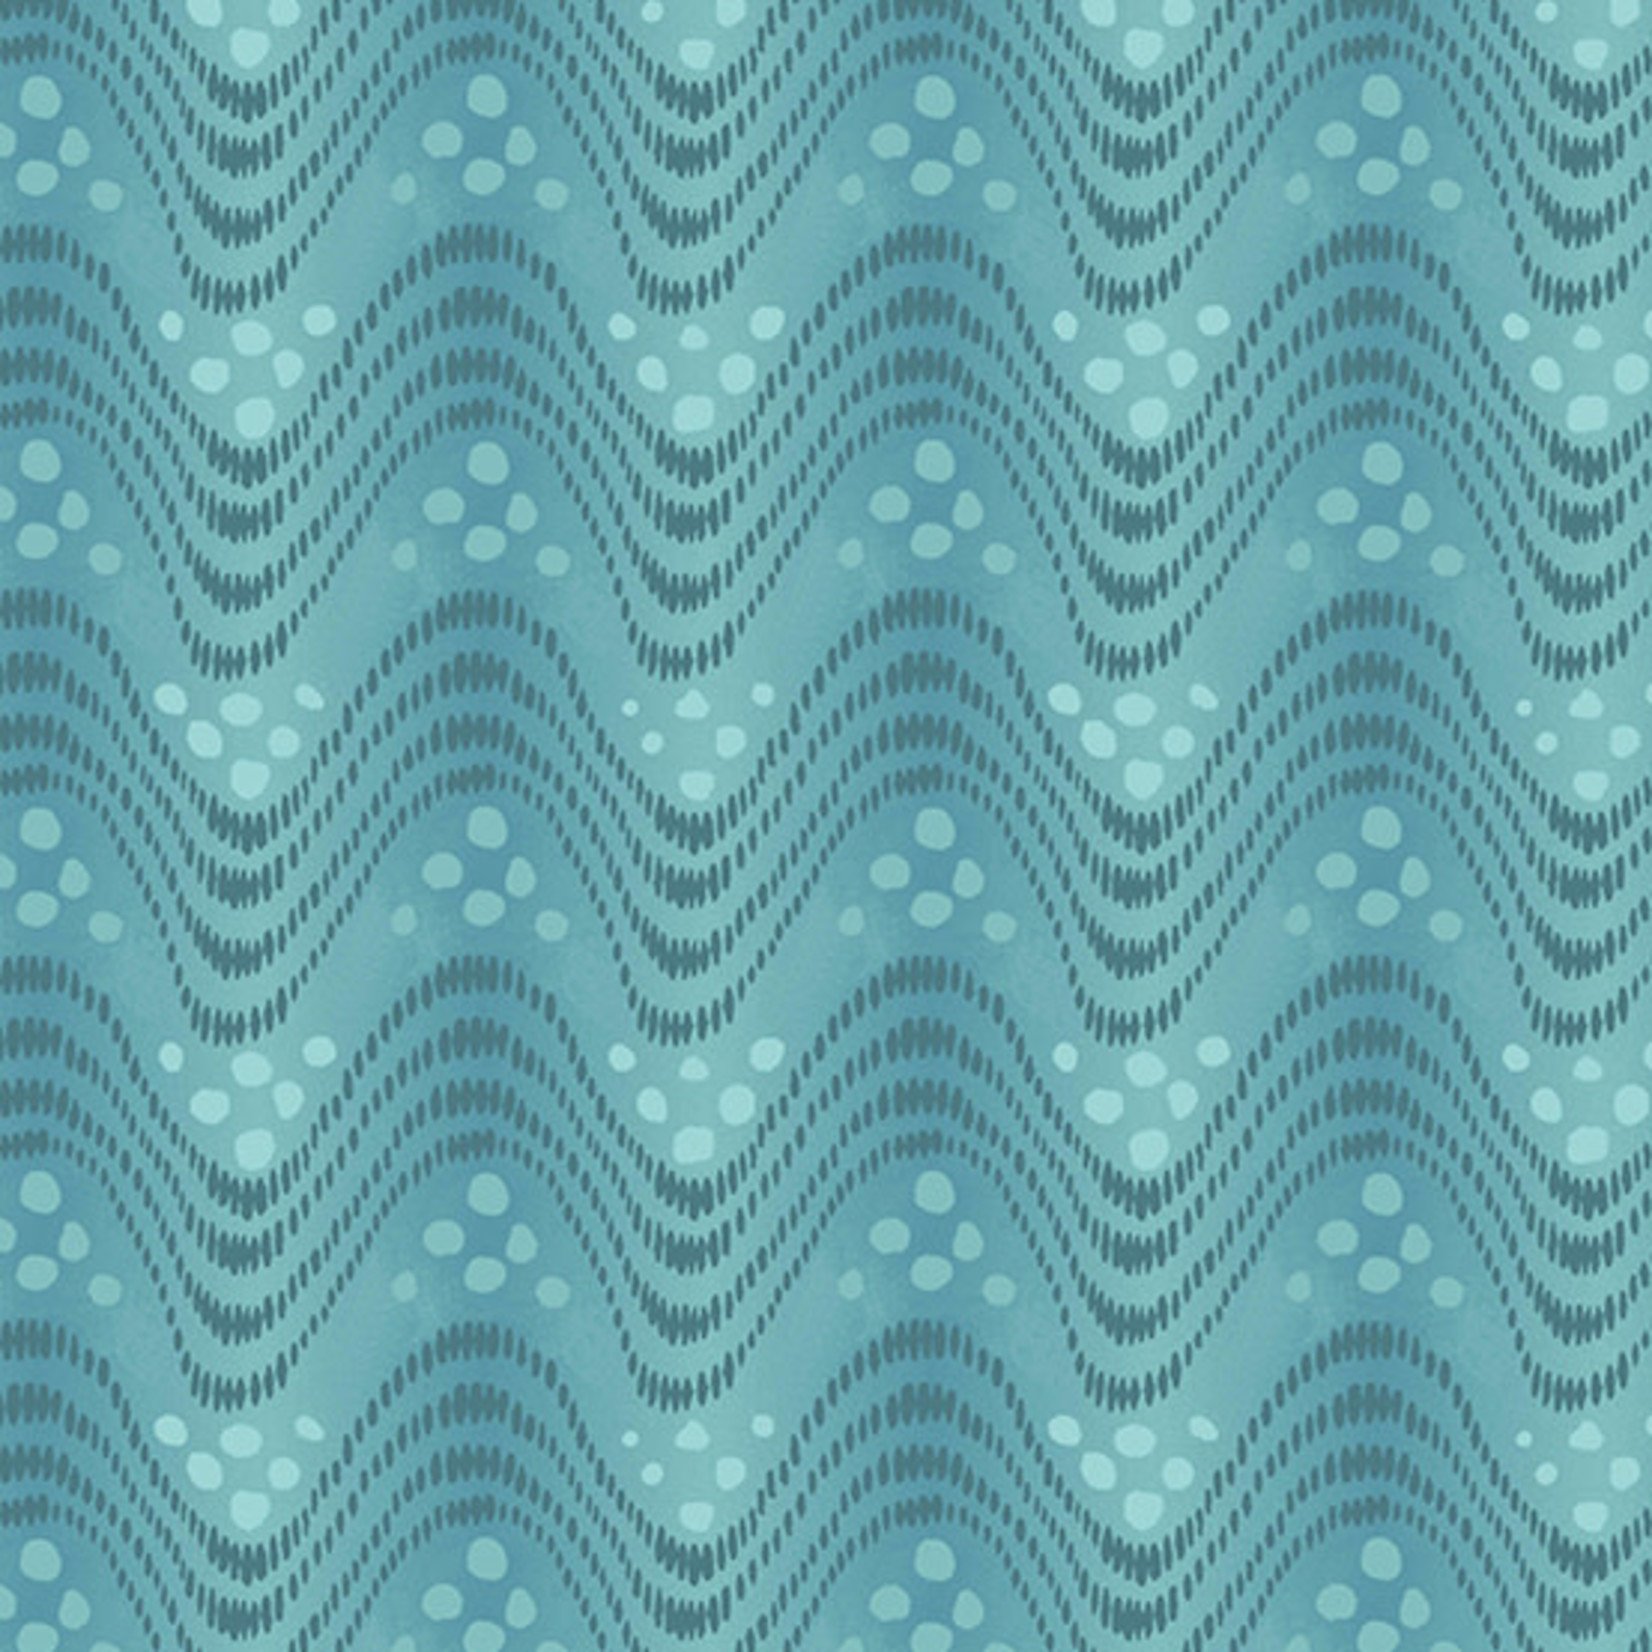 Andover The Andover Collective 9440 T, Teal Waves, $0.19/cm or $19/m